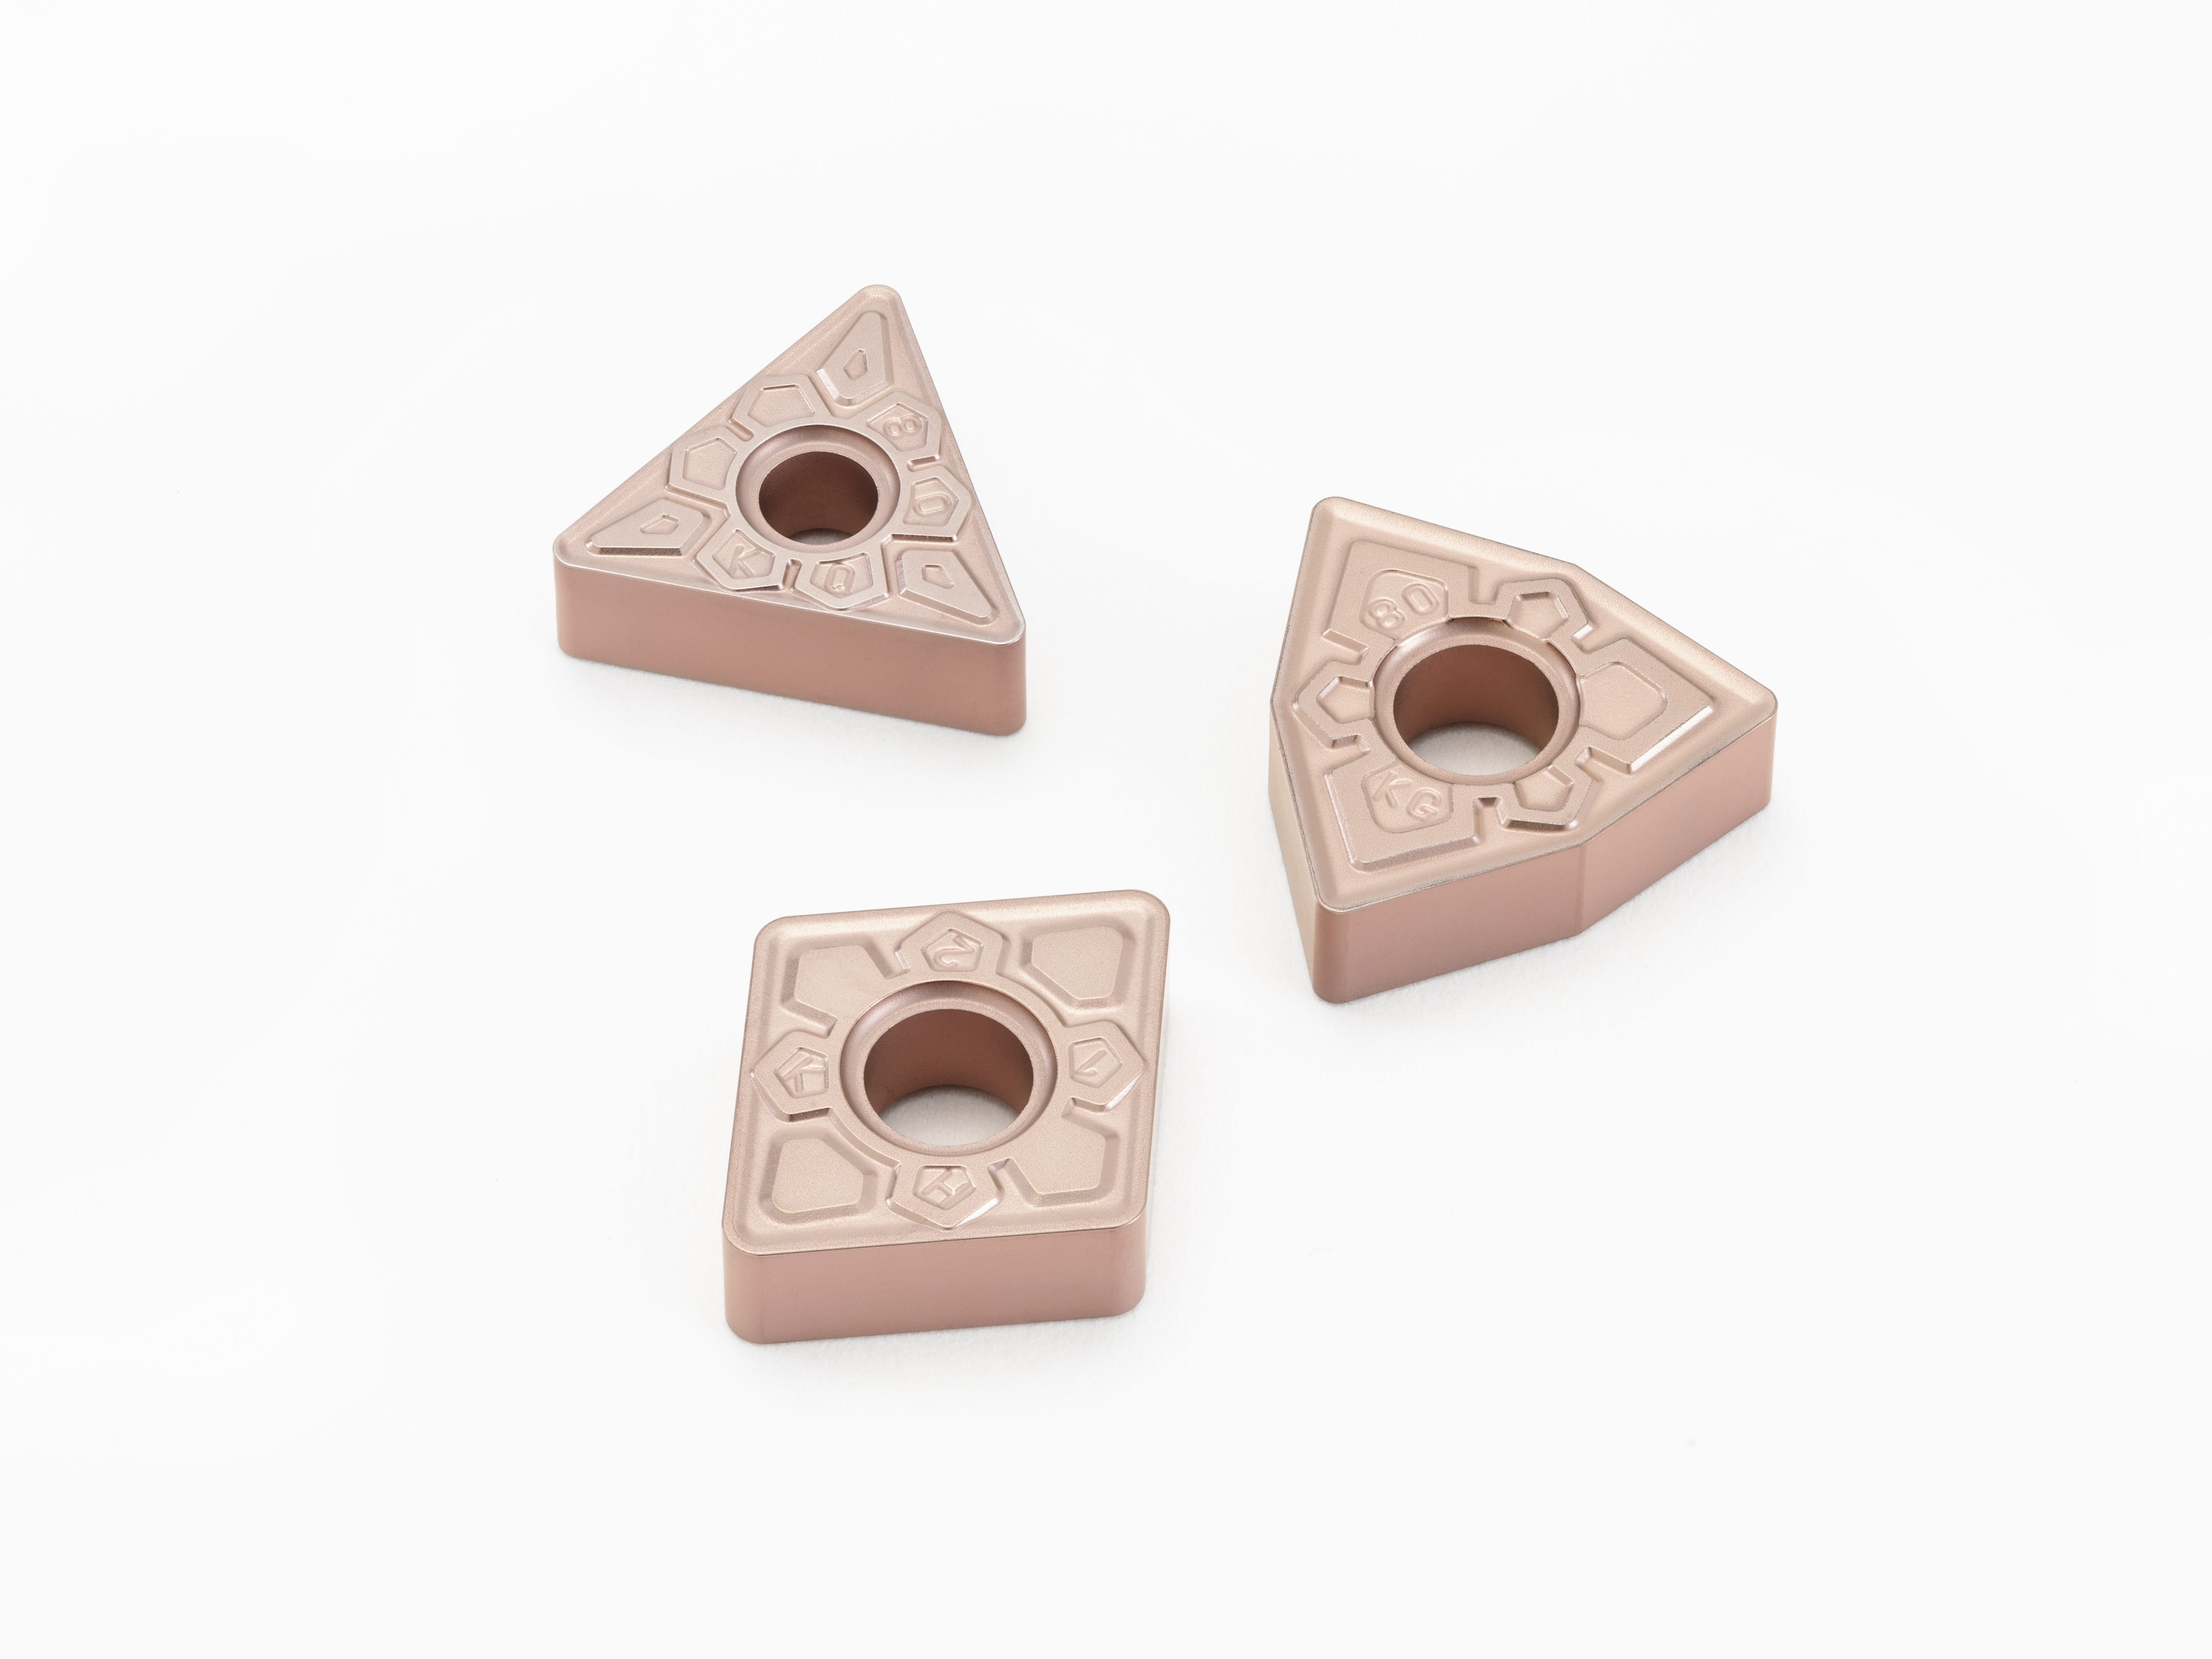 The new inserts help make metalworking tools that can deliver stable machining performance over a wide range of cutting conditions.